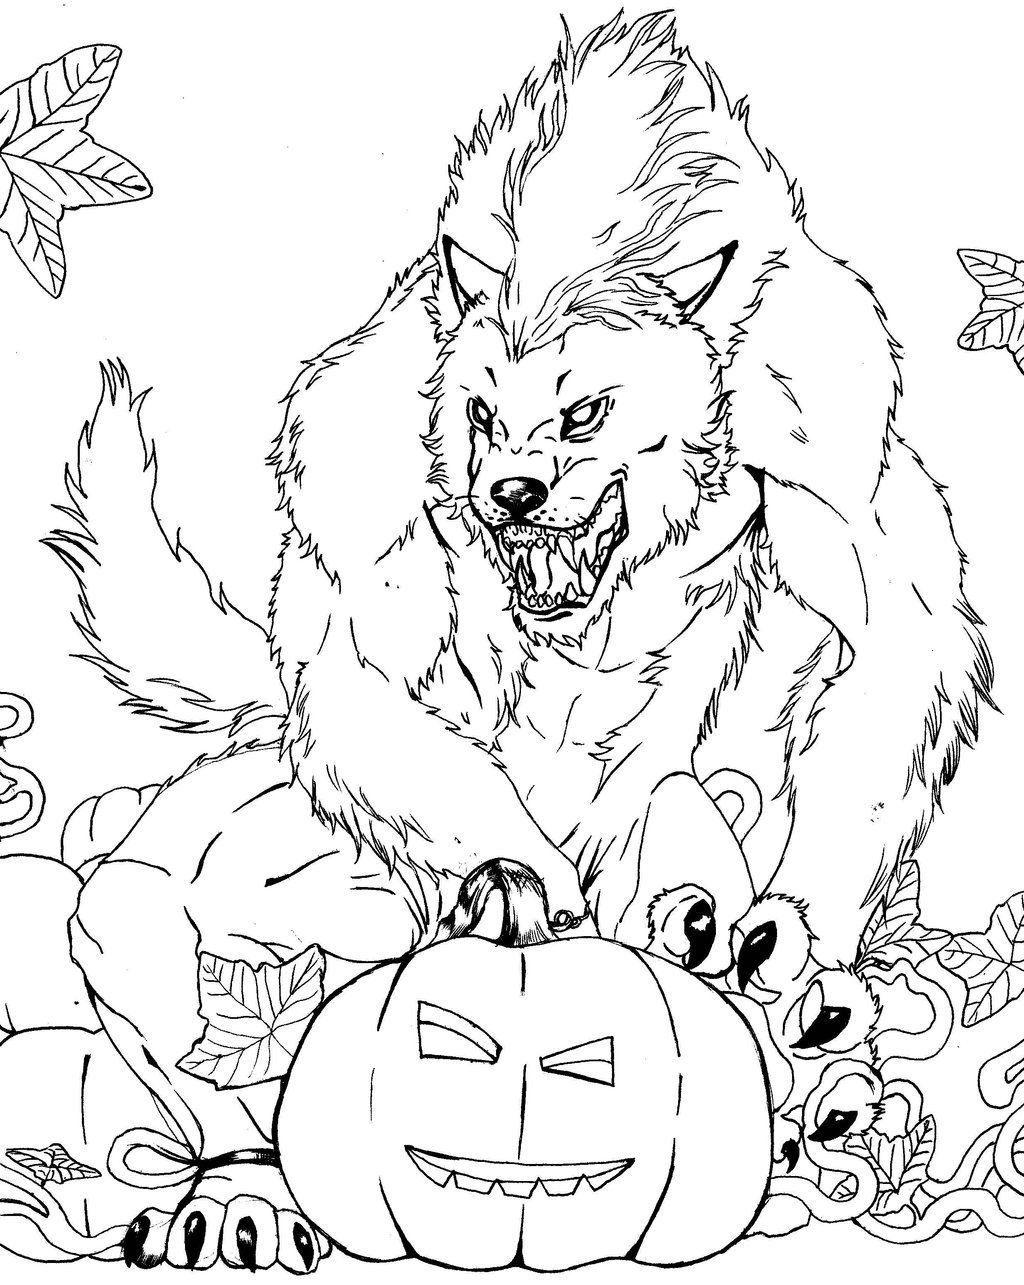 Scary Werewolf Coloring Page